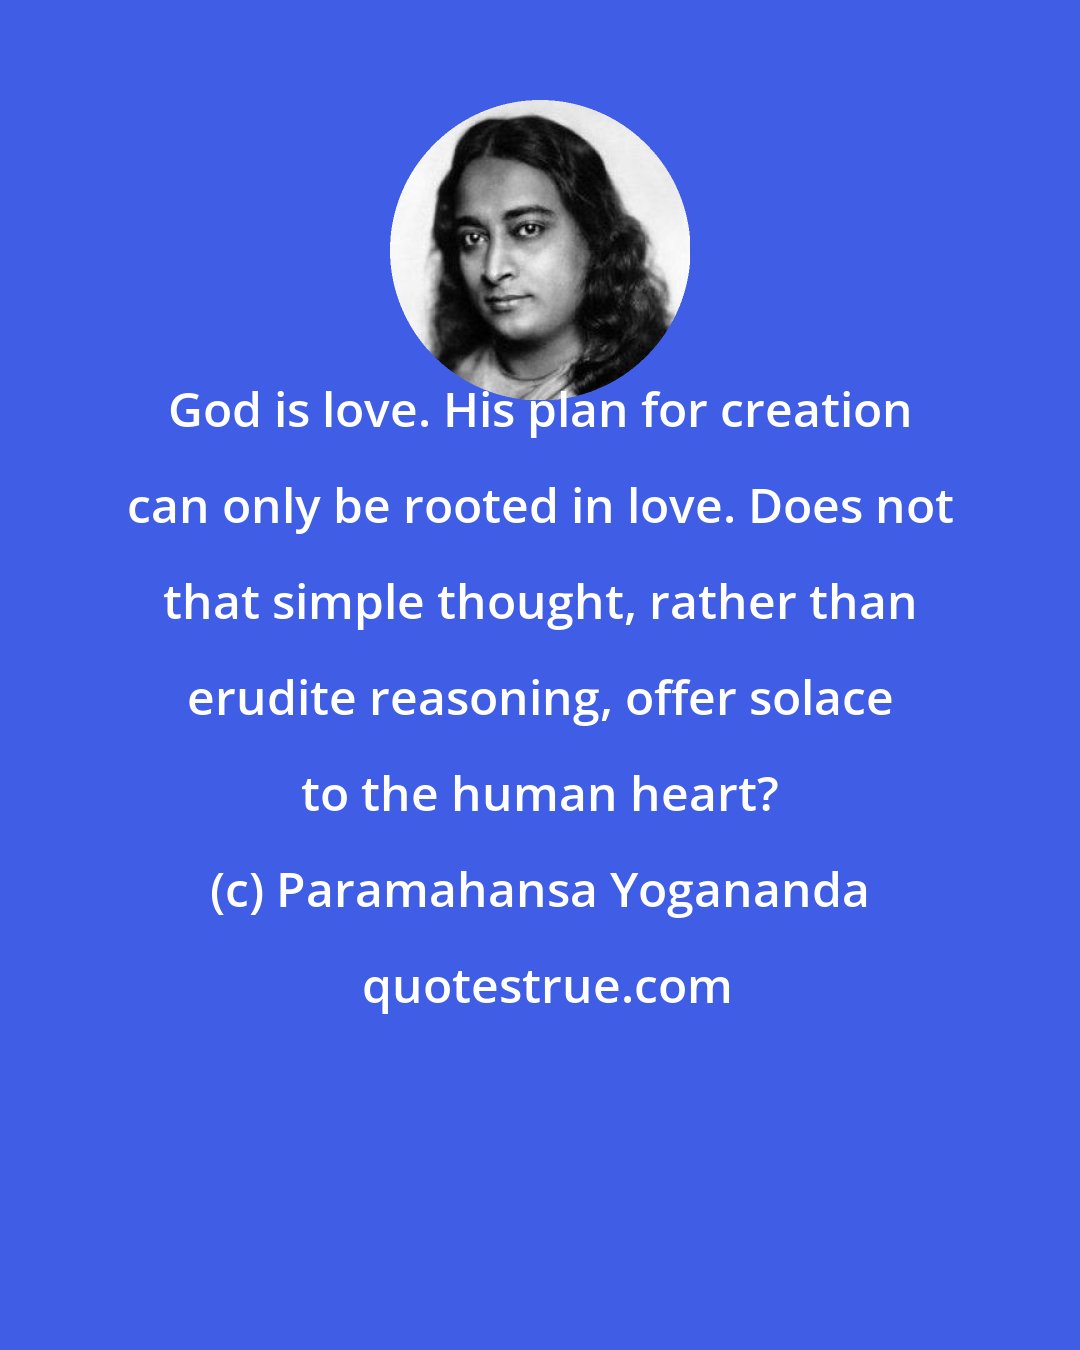 Paramahansa Yogananda: God is love. His plan for creation can only be rooted in love. Does not that simple thought, rather than erudite reasoning, offer solace to the human heart?